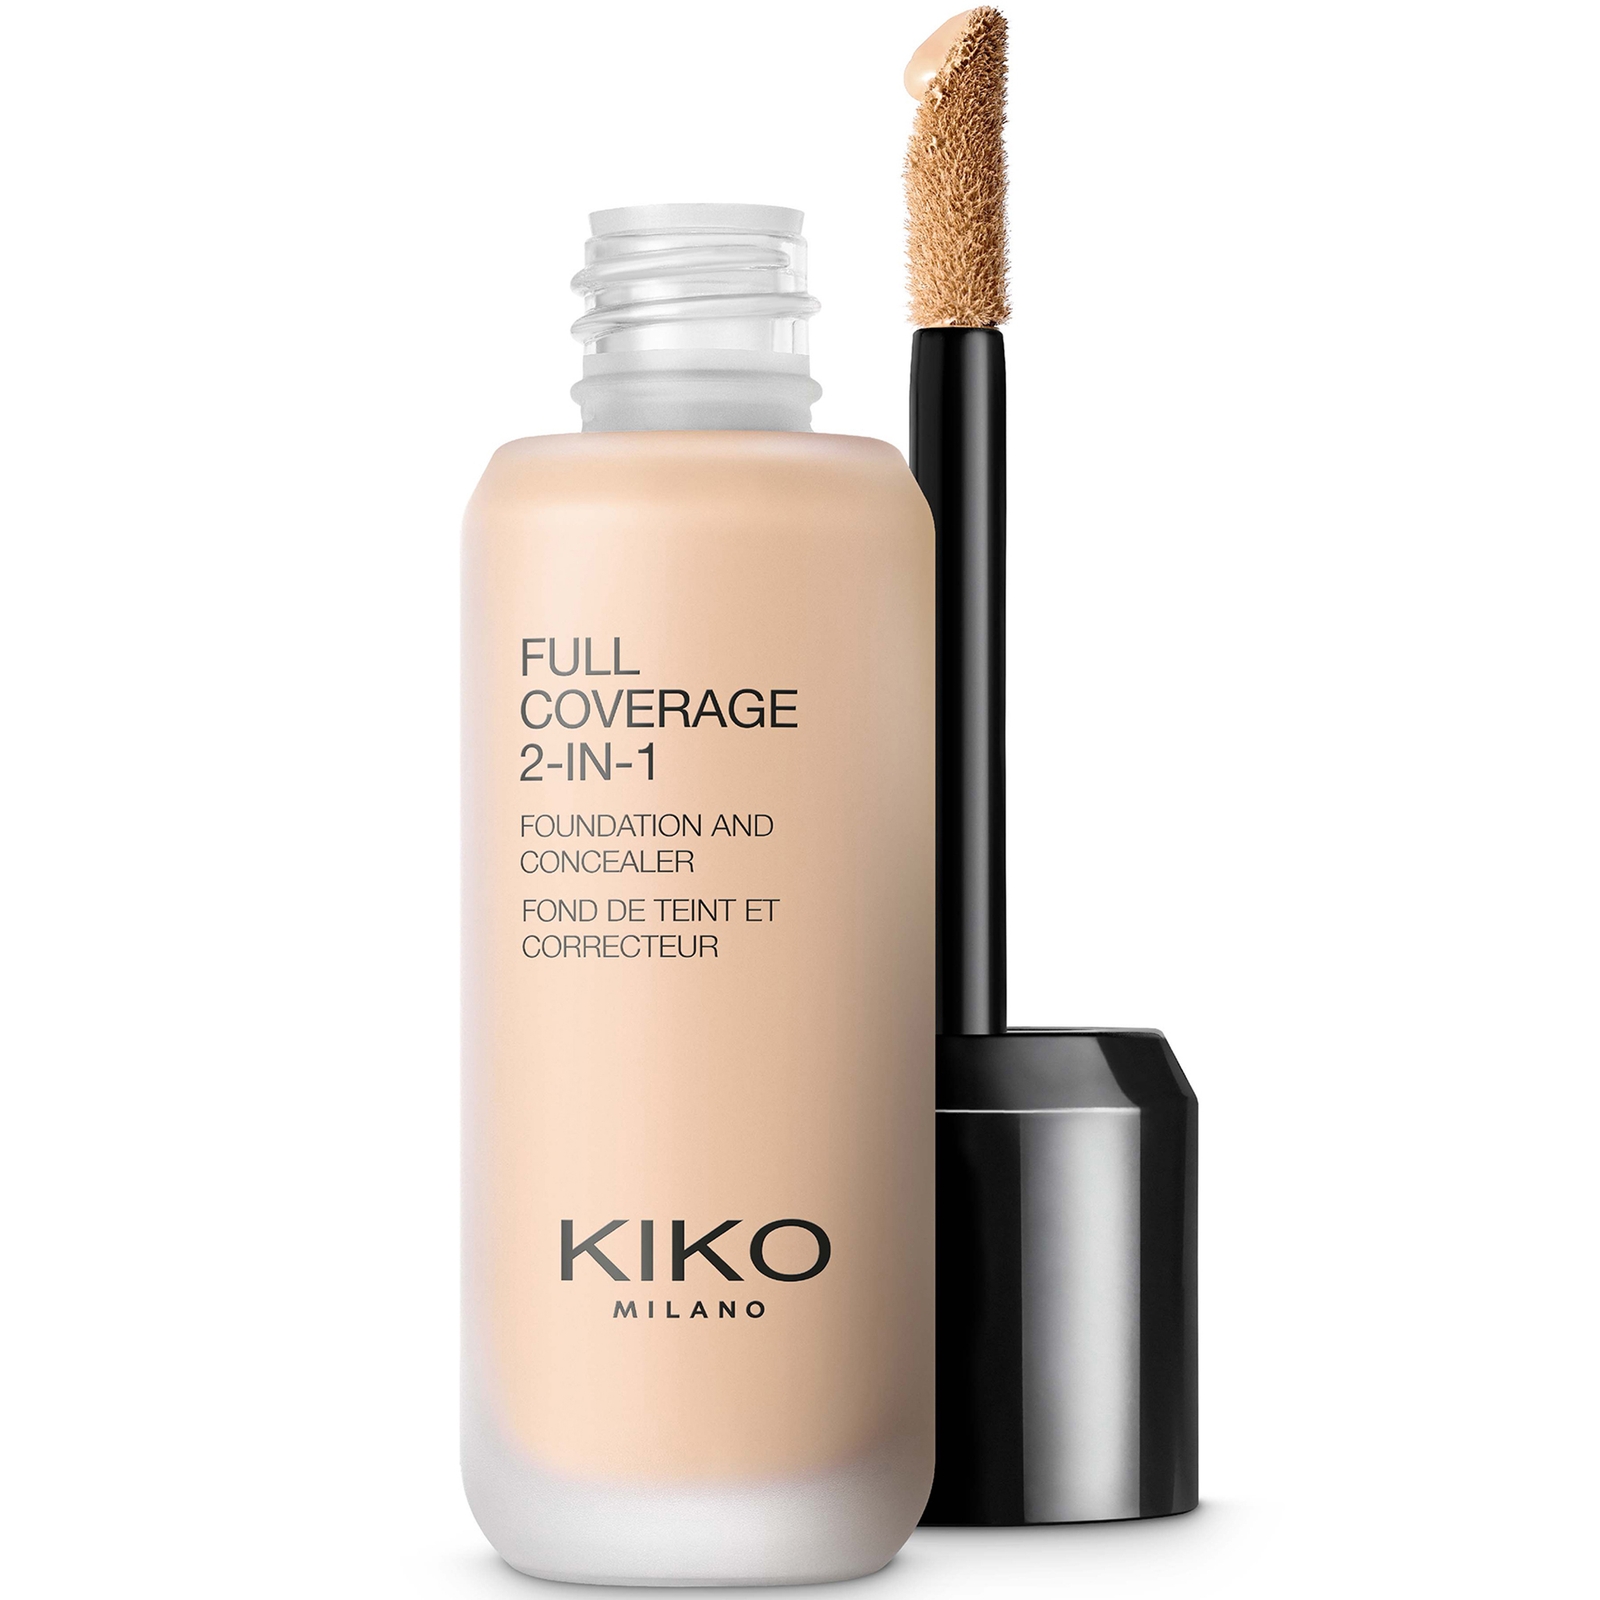 Image of KIKO Milano Full Coverage 2-in-1 Foundation and Concealer 25ml (Various Shades) - 10 Warm Rose